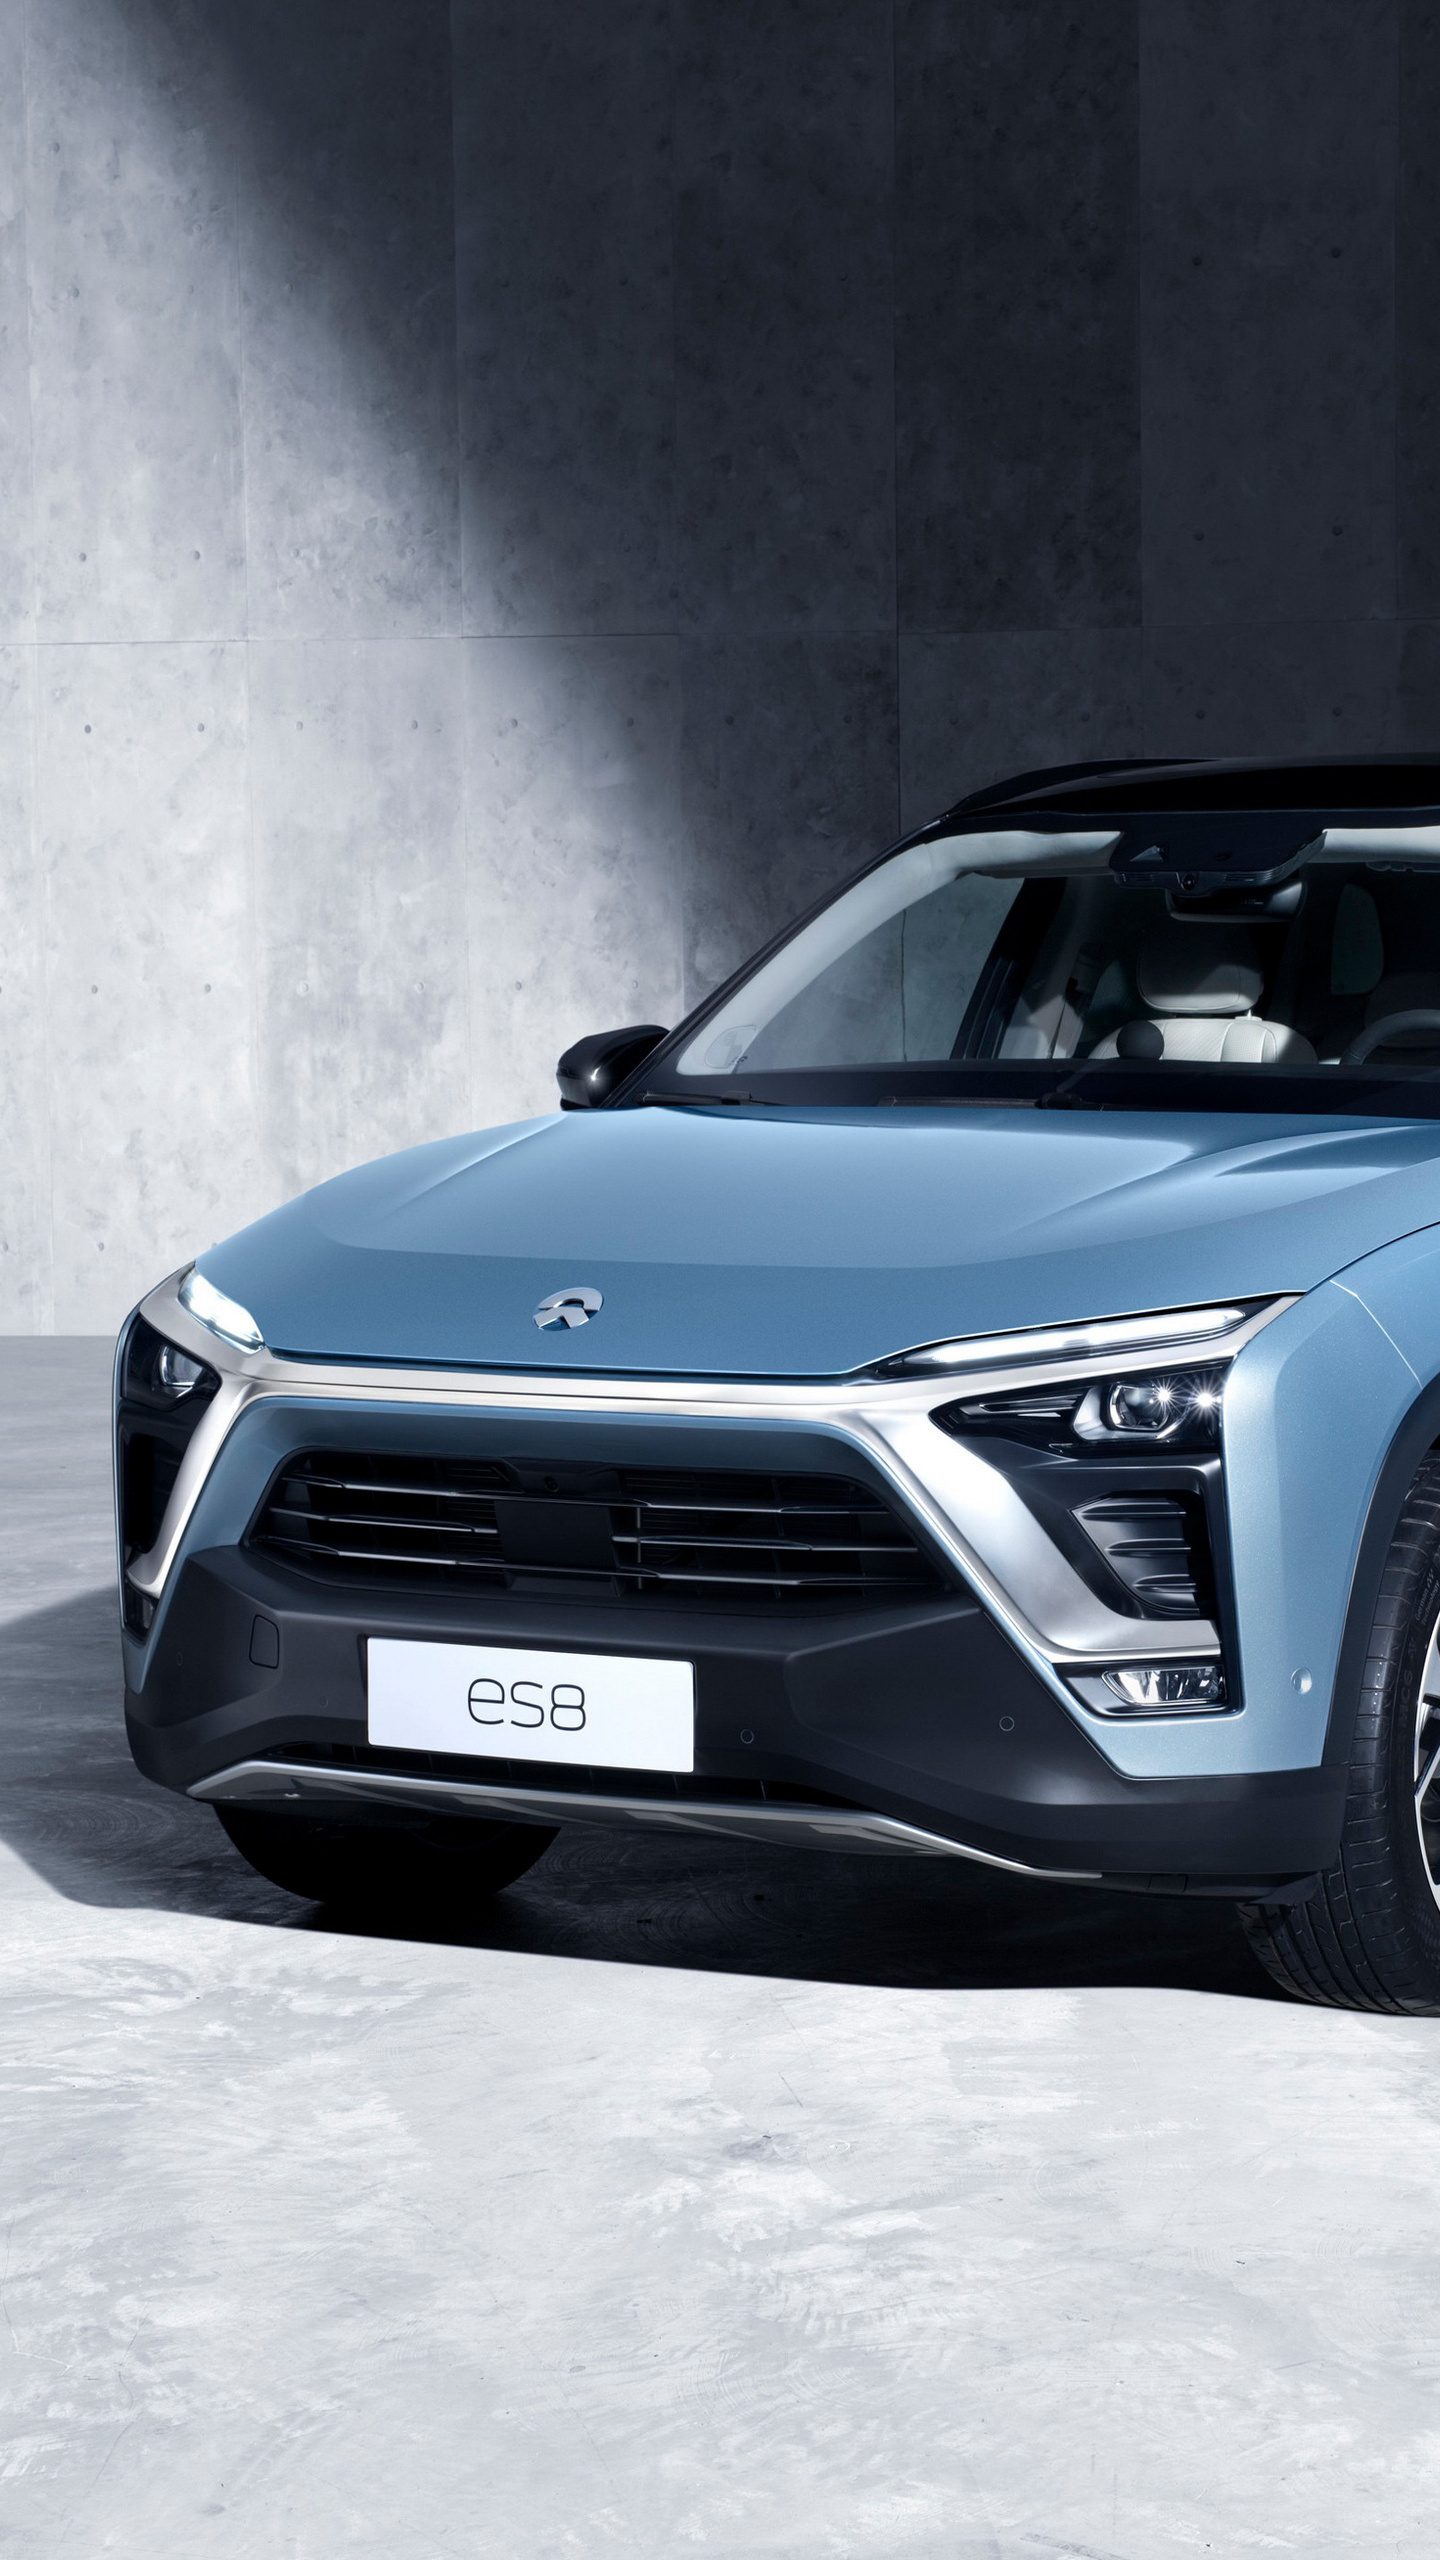 NIO Auto, ES8 electric SUV, High-quality wallpapers, HD and 4K images, 1440x2560 HD Handy